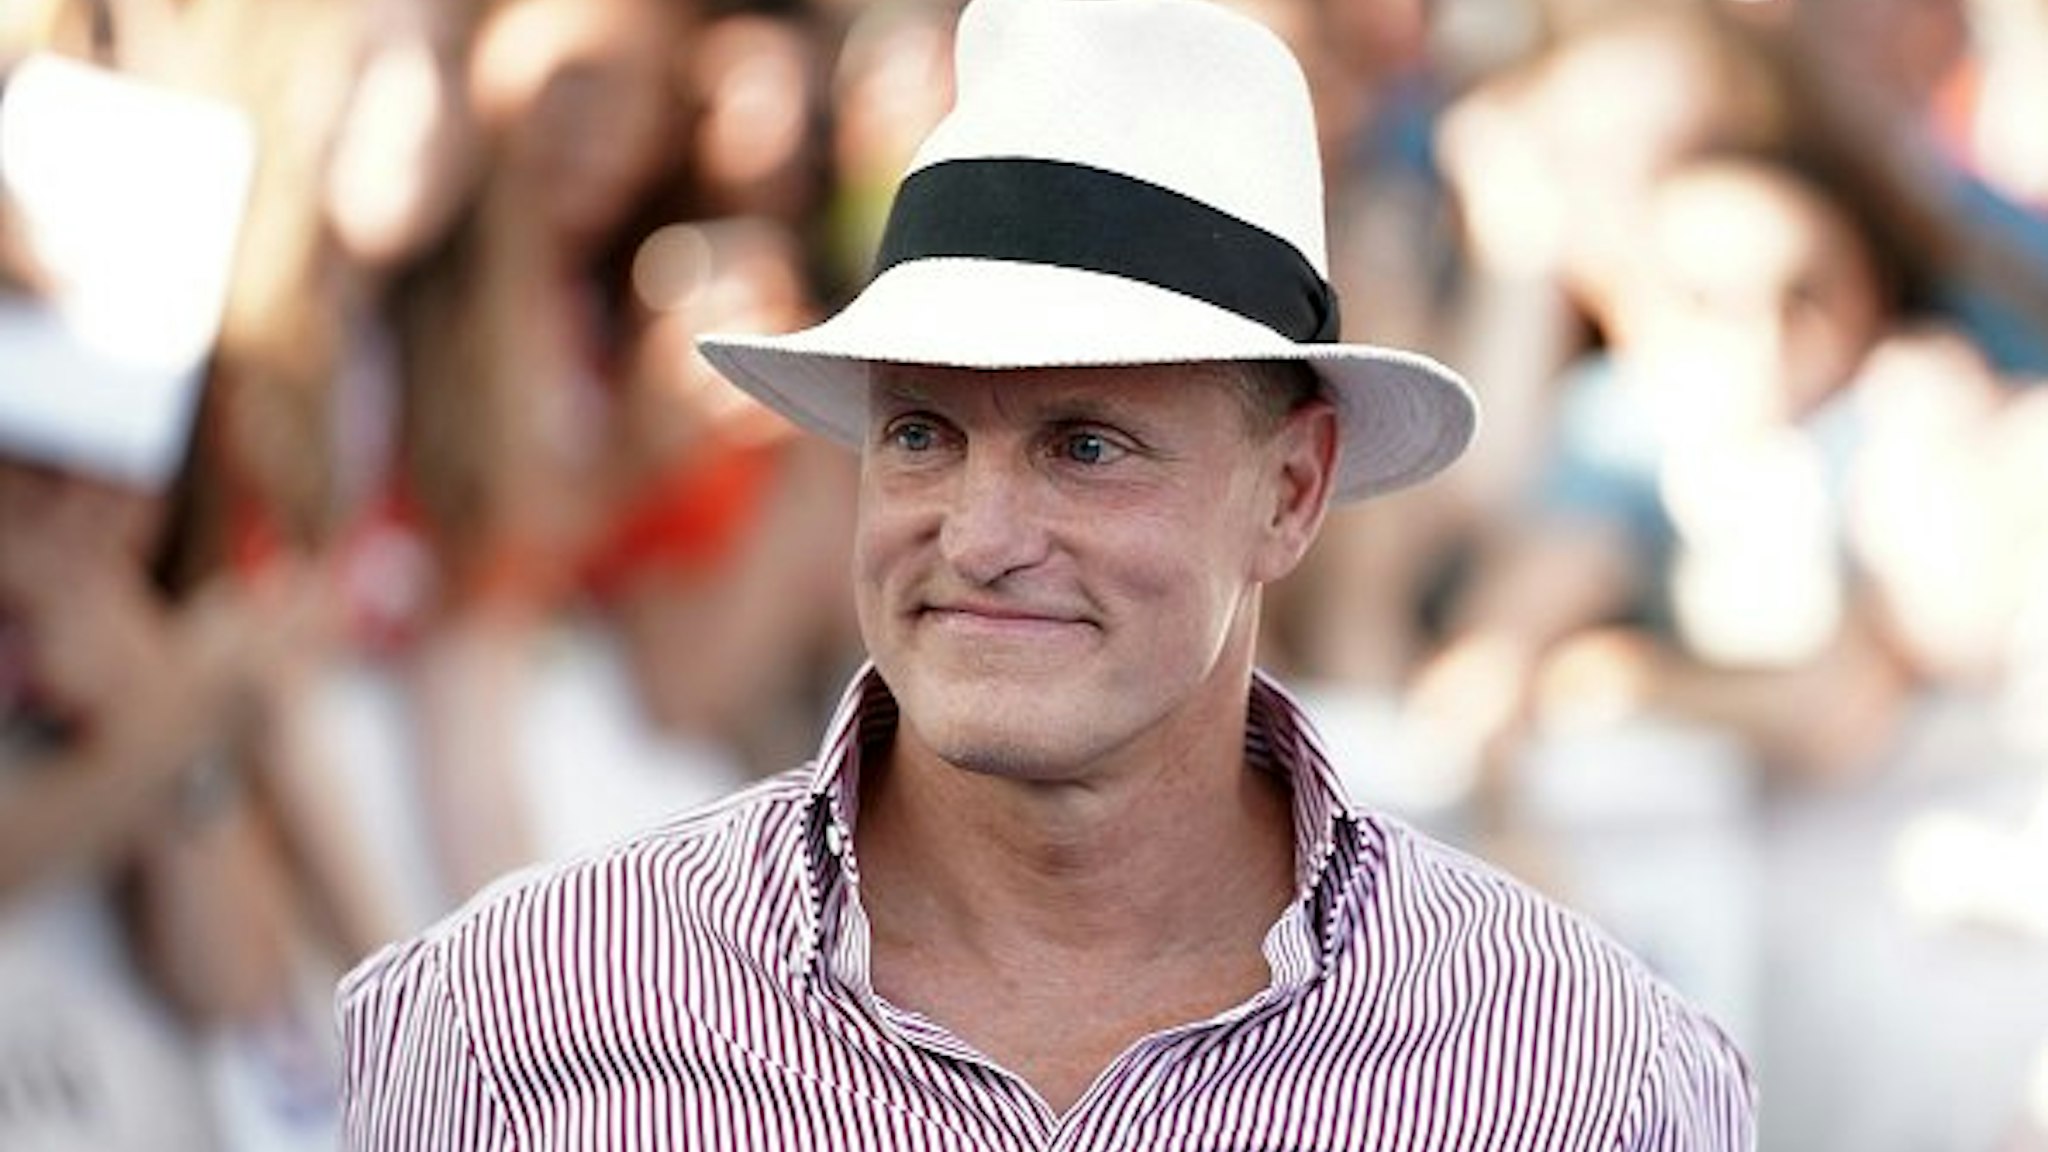 Woody Harrelson attends Giffoni Film Festival 2019 on July 20, 2019 in Giffoni Valle Piana, Italy.